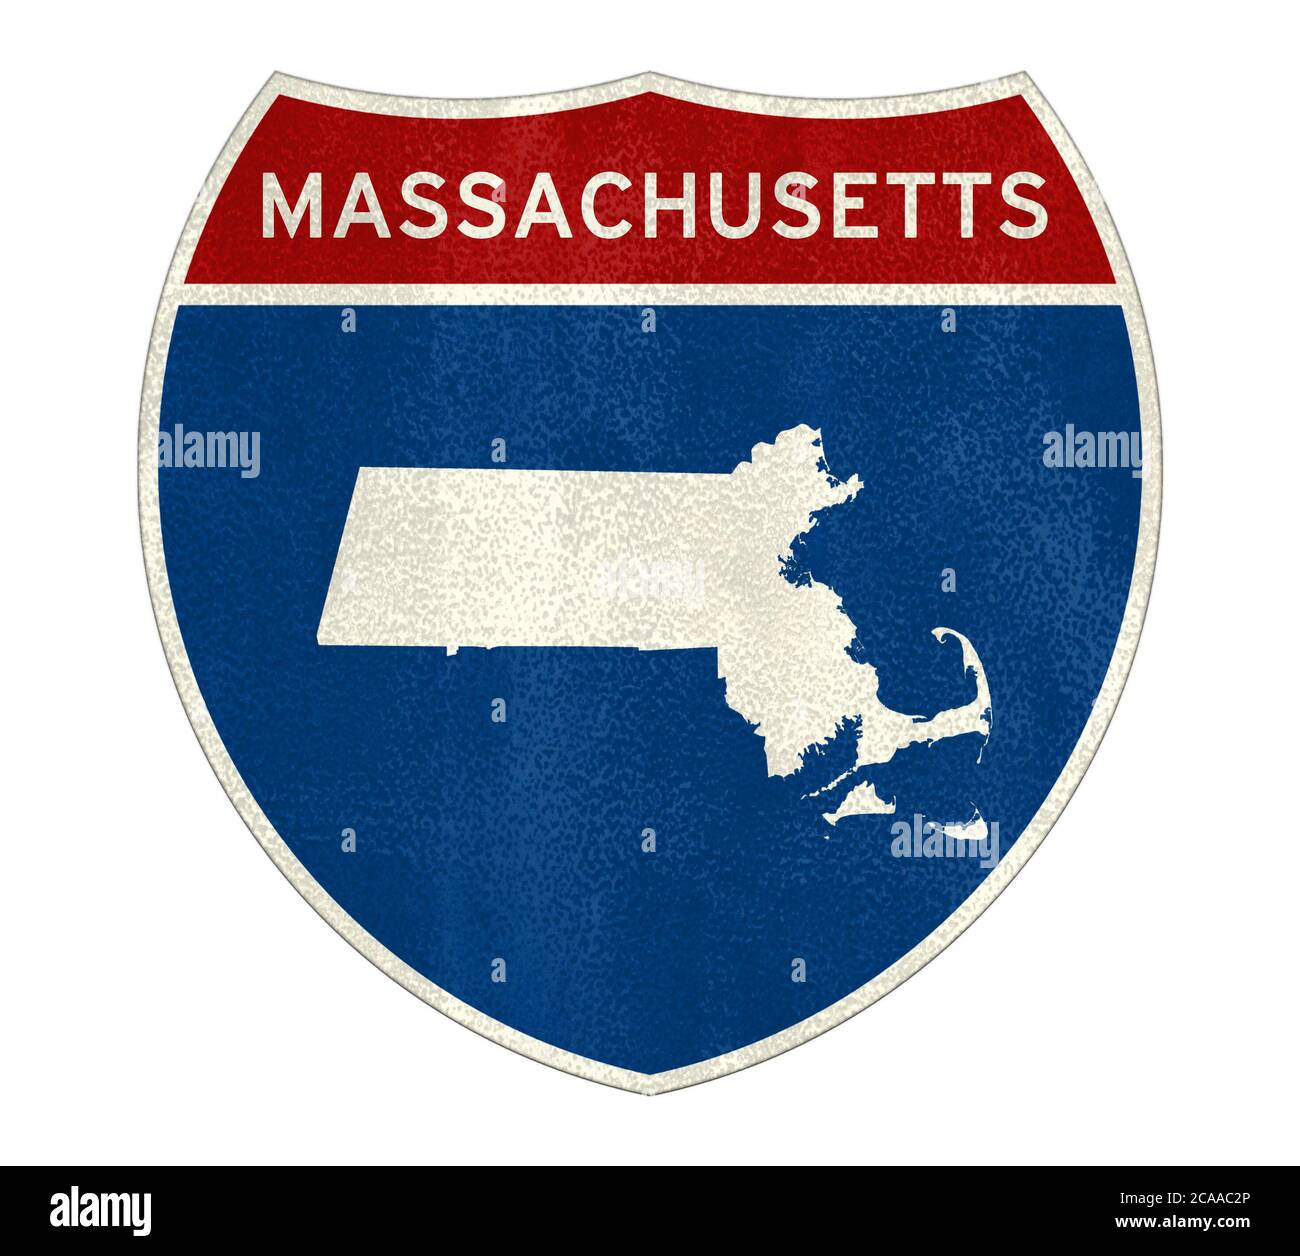 Massachusetts State Interstate road sign Banque D'Images